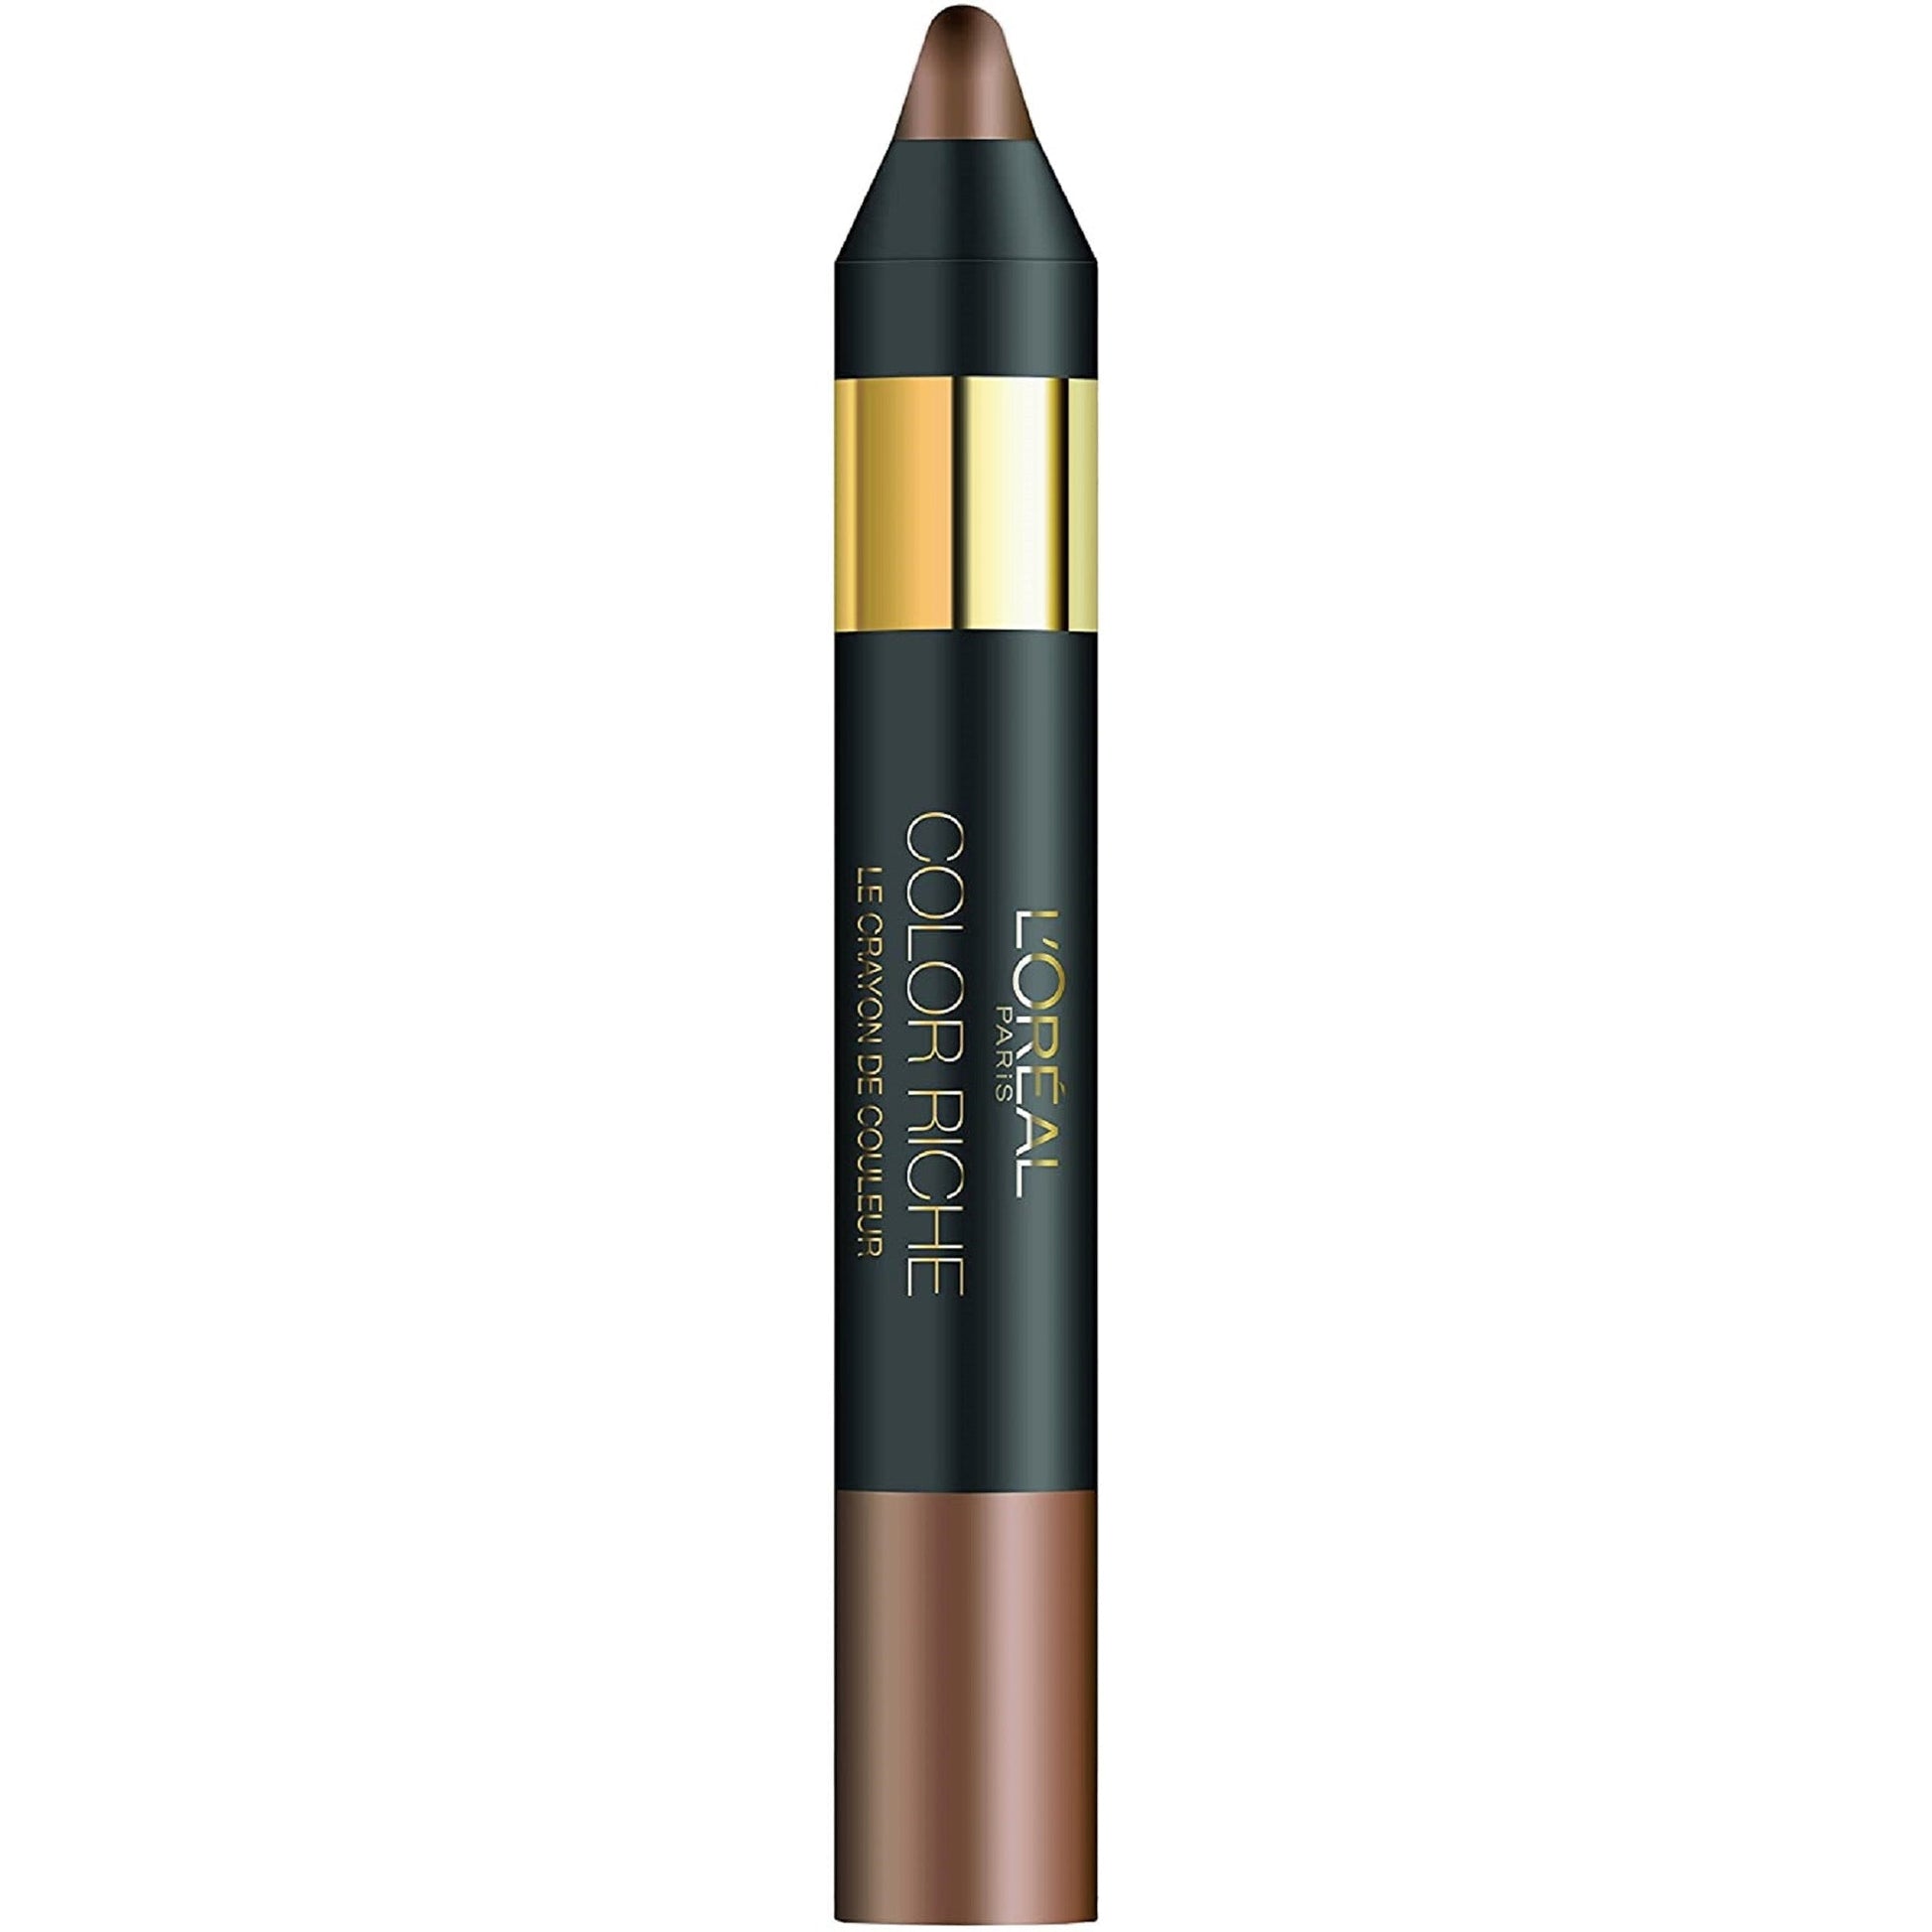 L'Oreal Color Riche Pencil Shadow 02 Enigmatic Brown-L'Oreal-BeautyNmakeup.co.uk